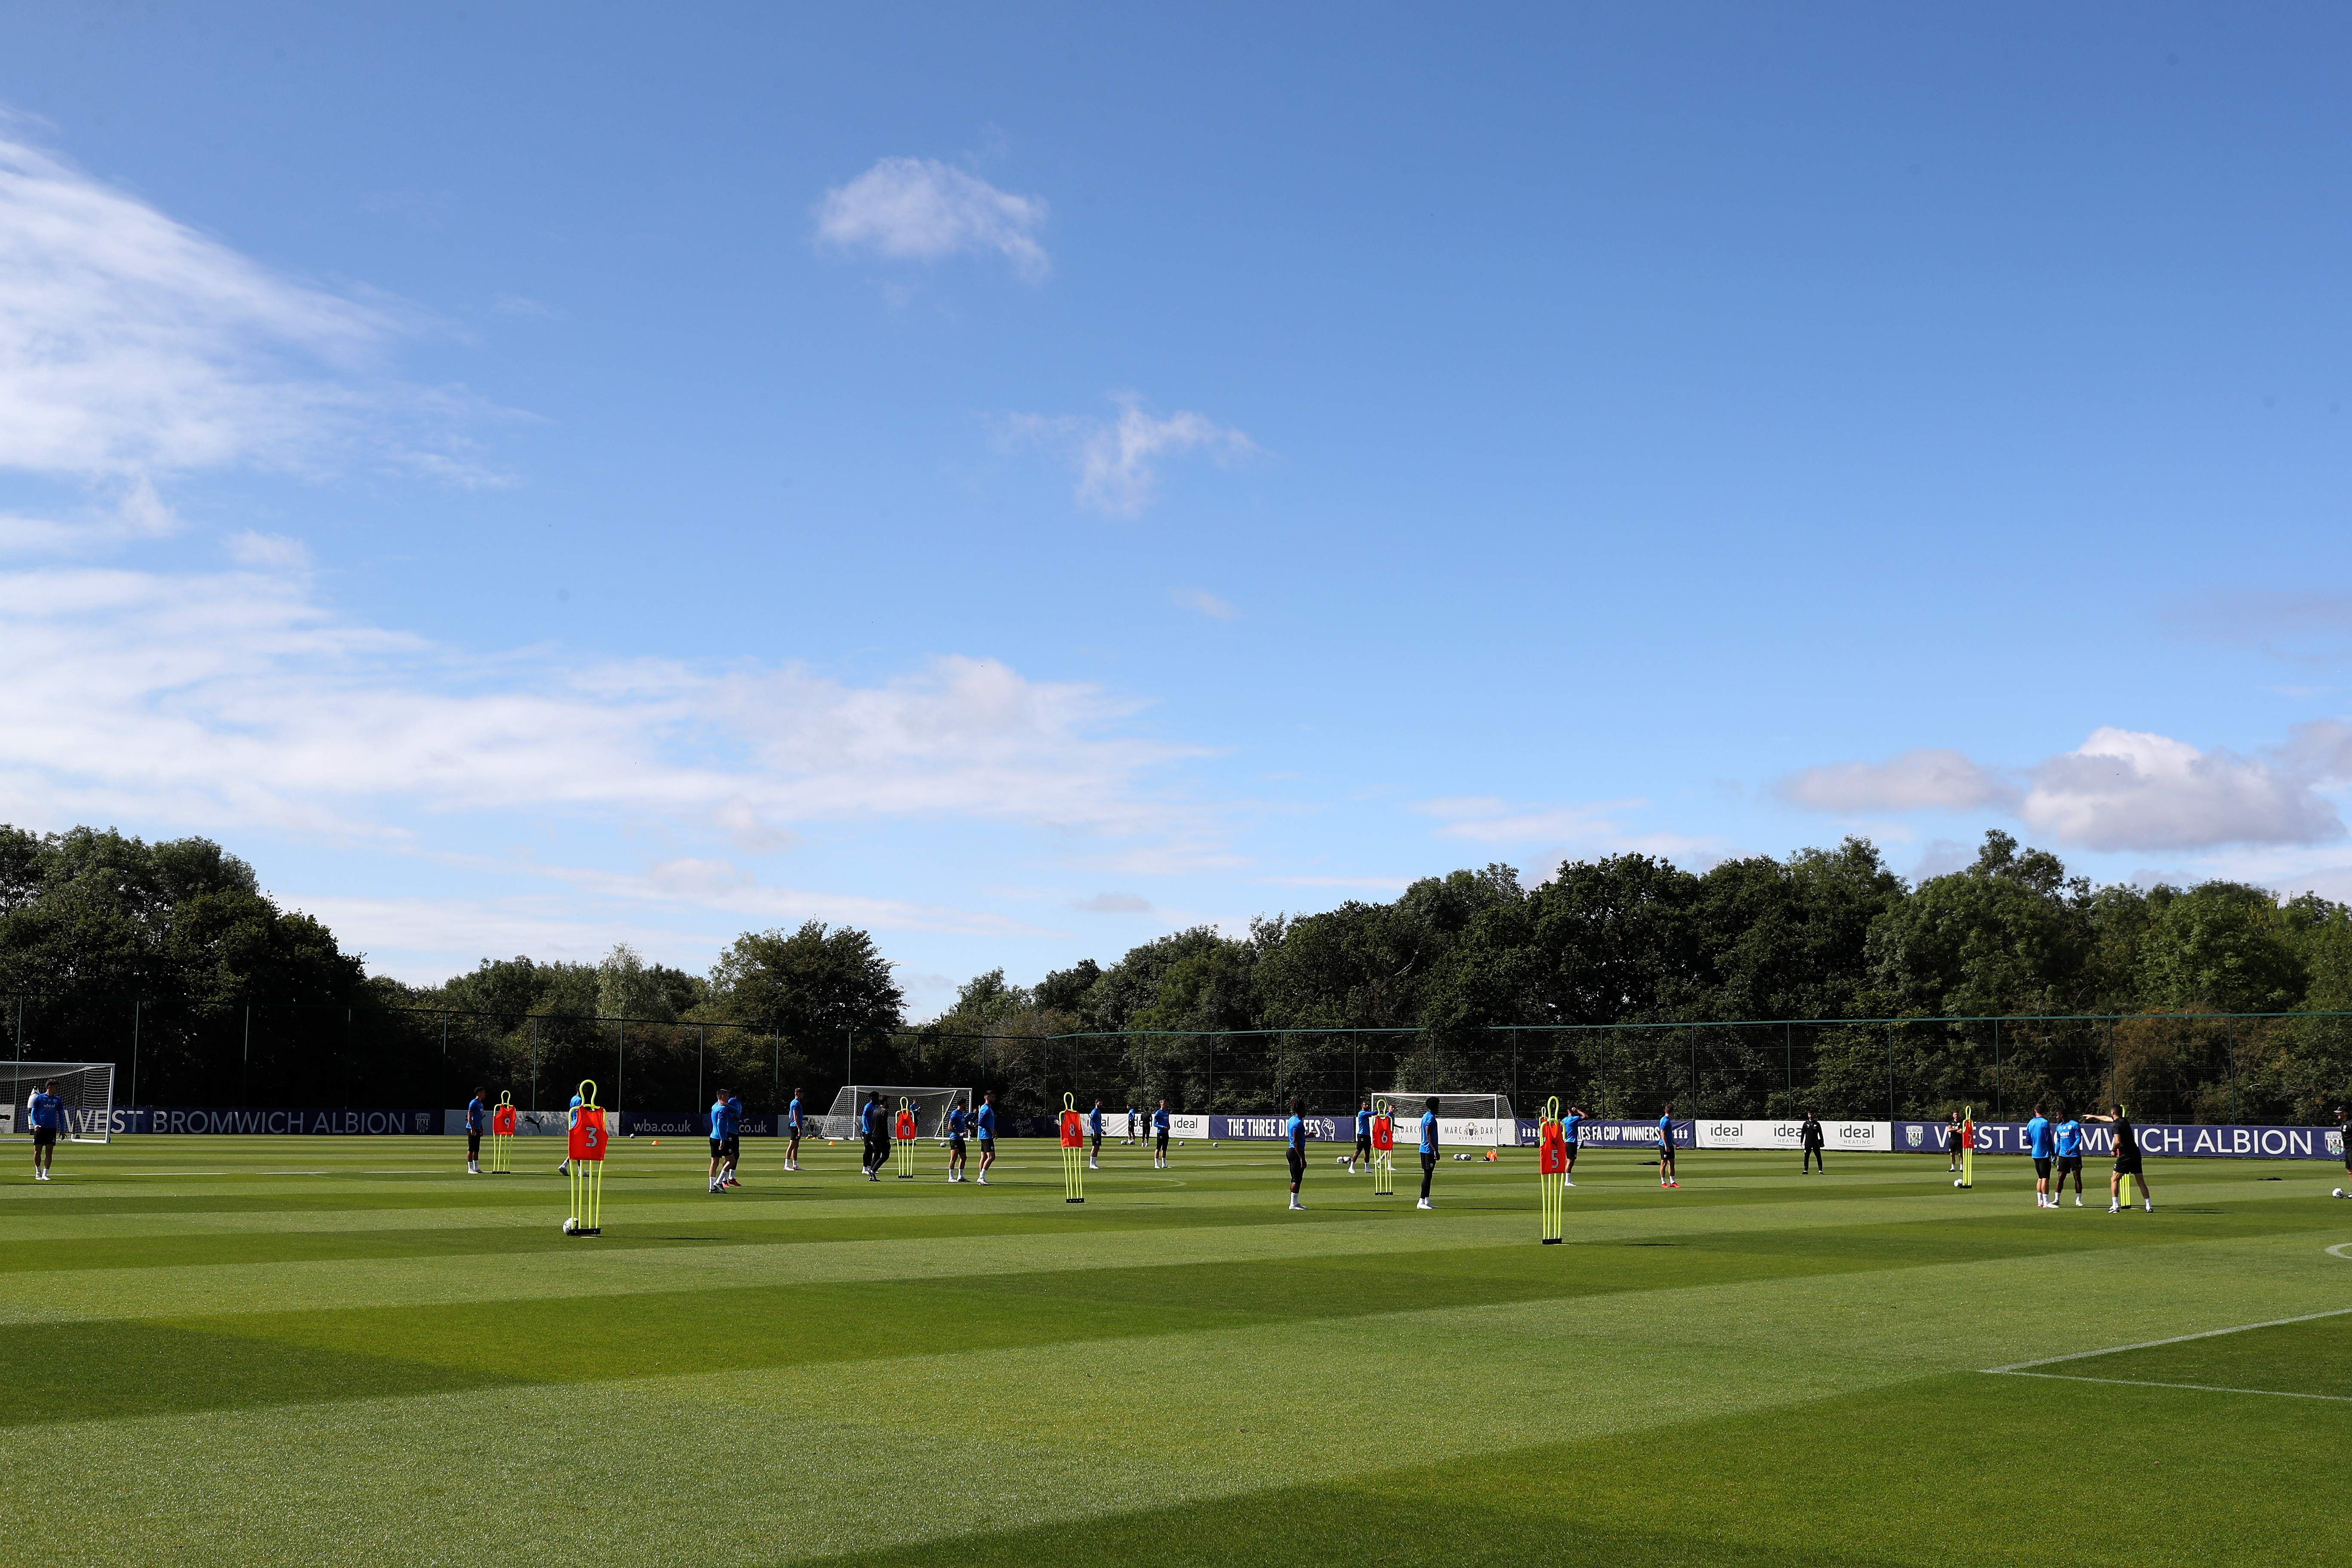 A wide view of the training pitch with the players training on it